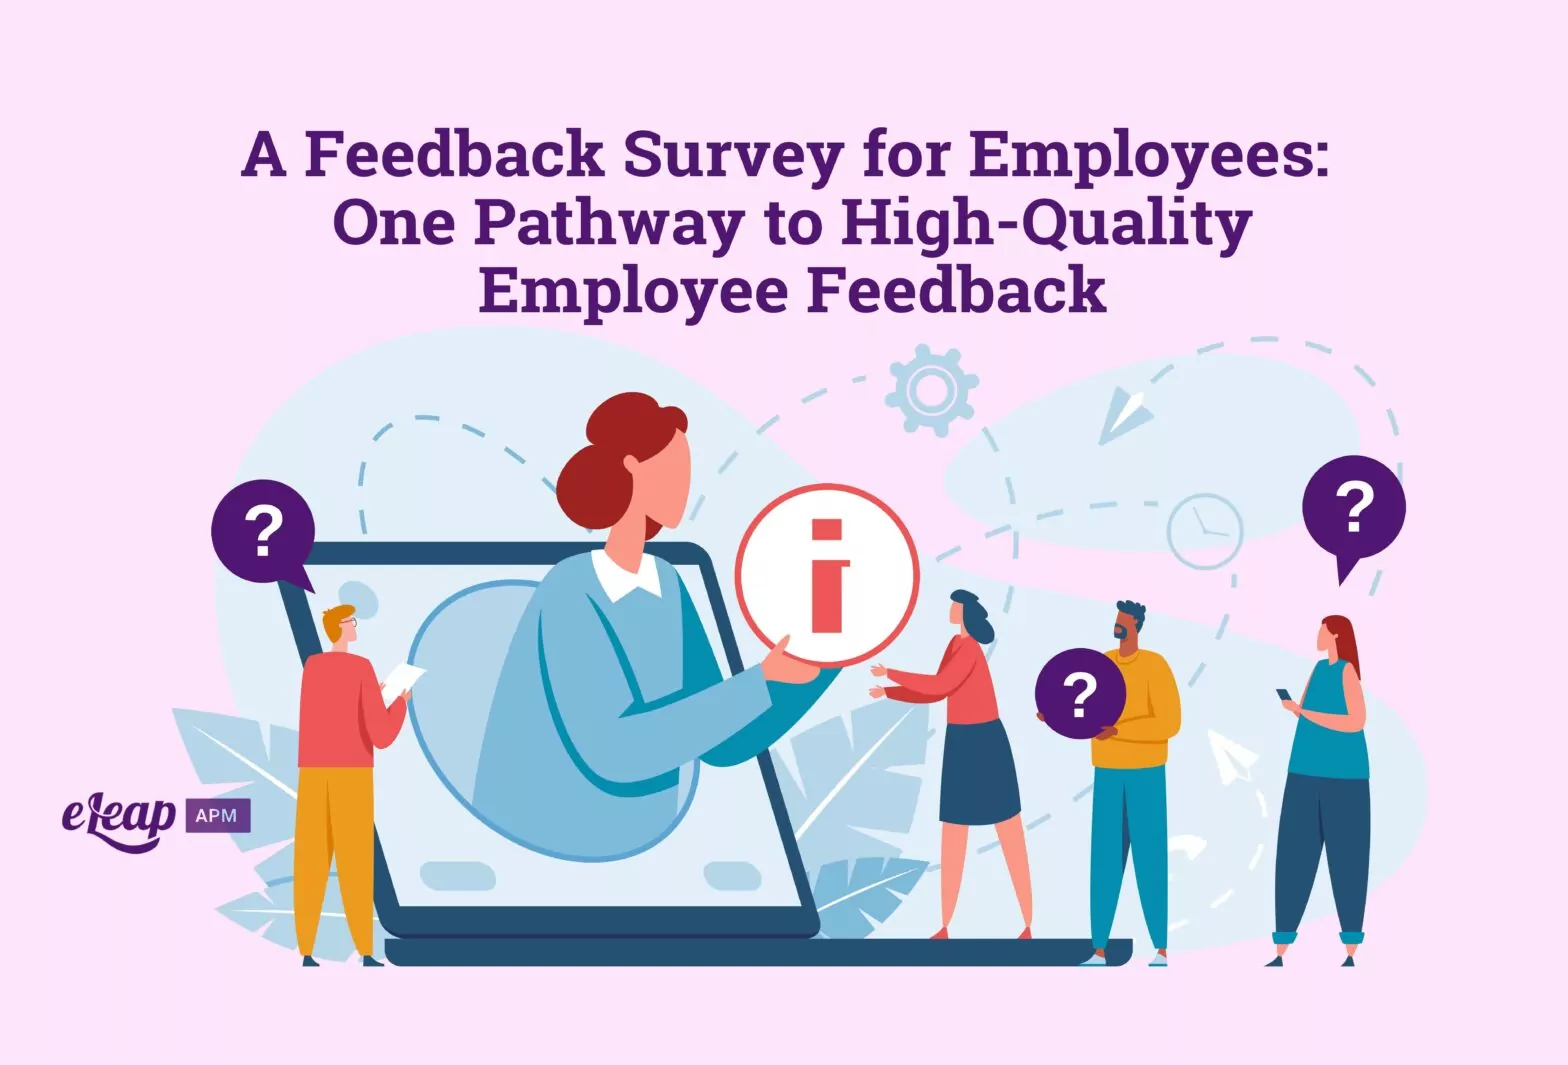 A Feedback Survey for Employees: One Pathway to High-Quality Employee Feedback